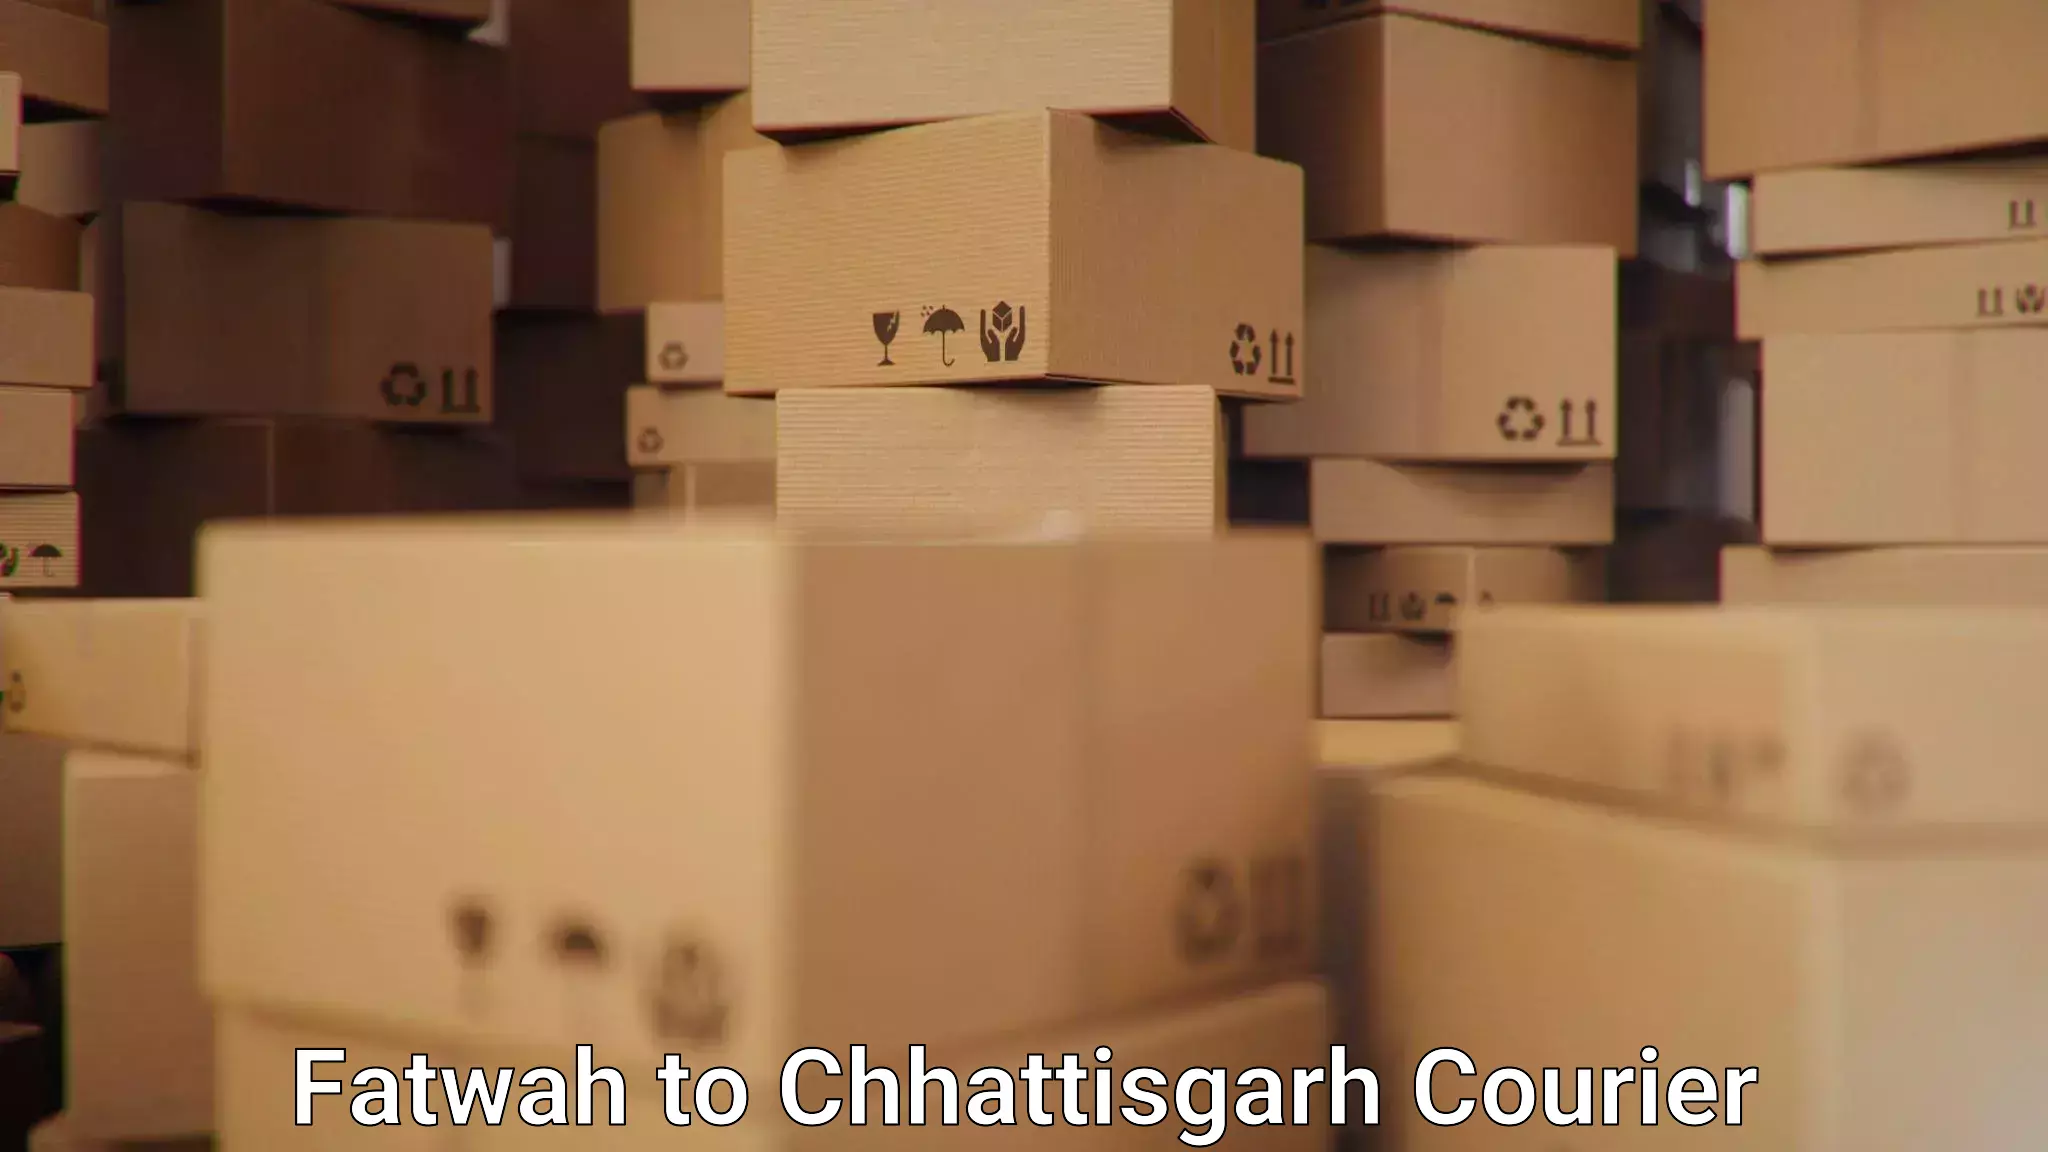 Delivery service partnership in Fatwah to Chhattisgarh